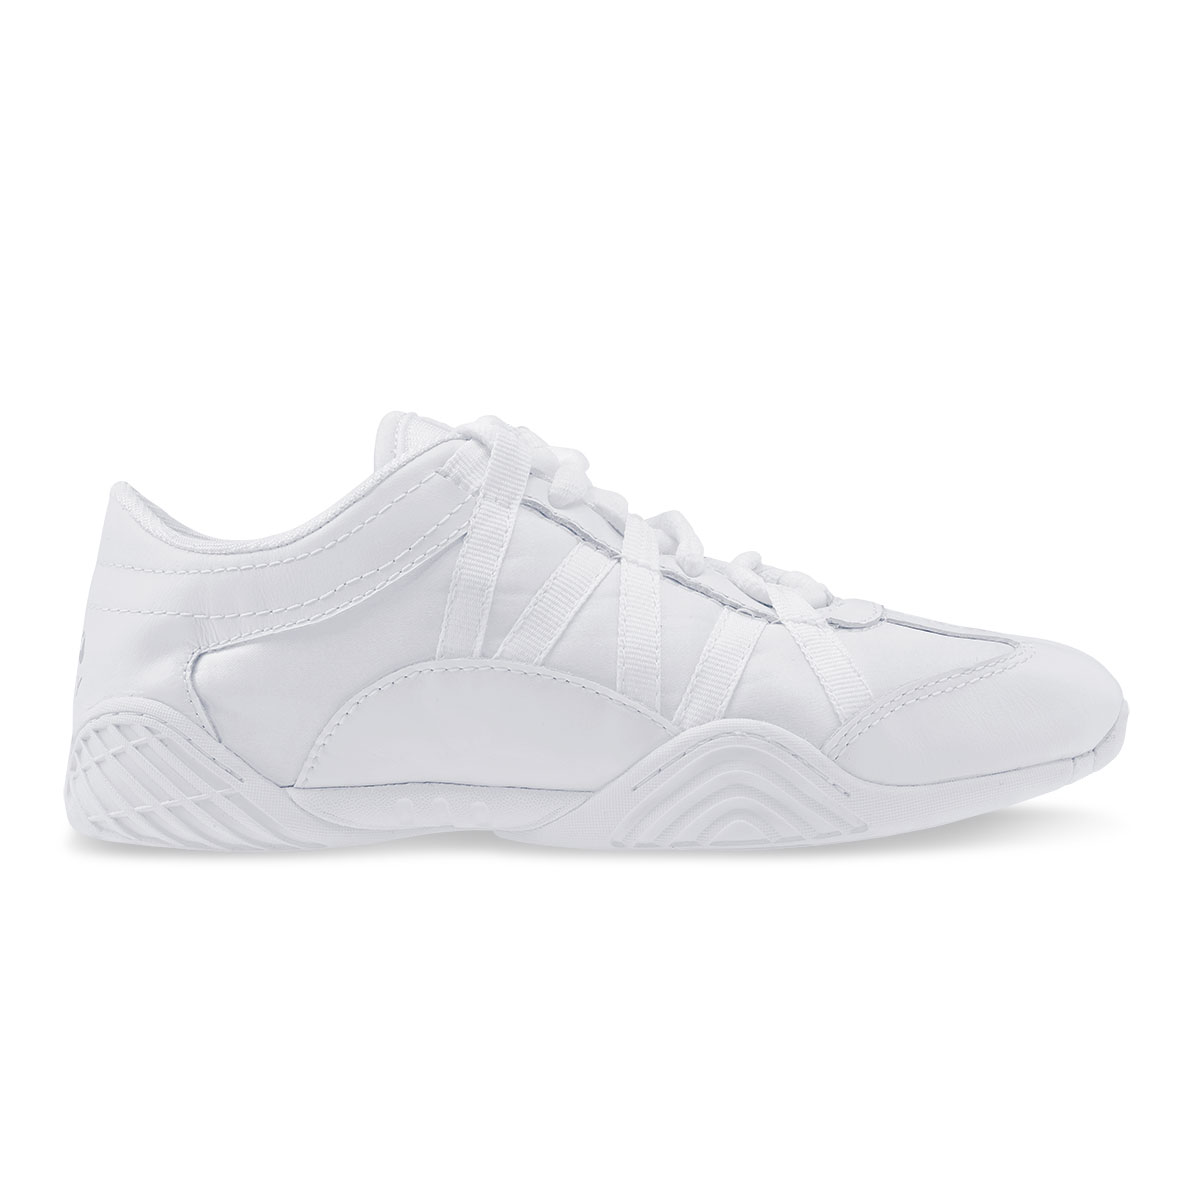 nfinity evolution cheer shoes near me